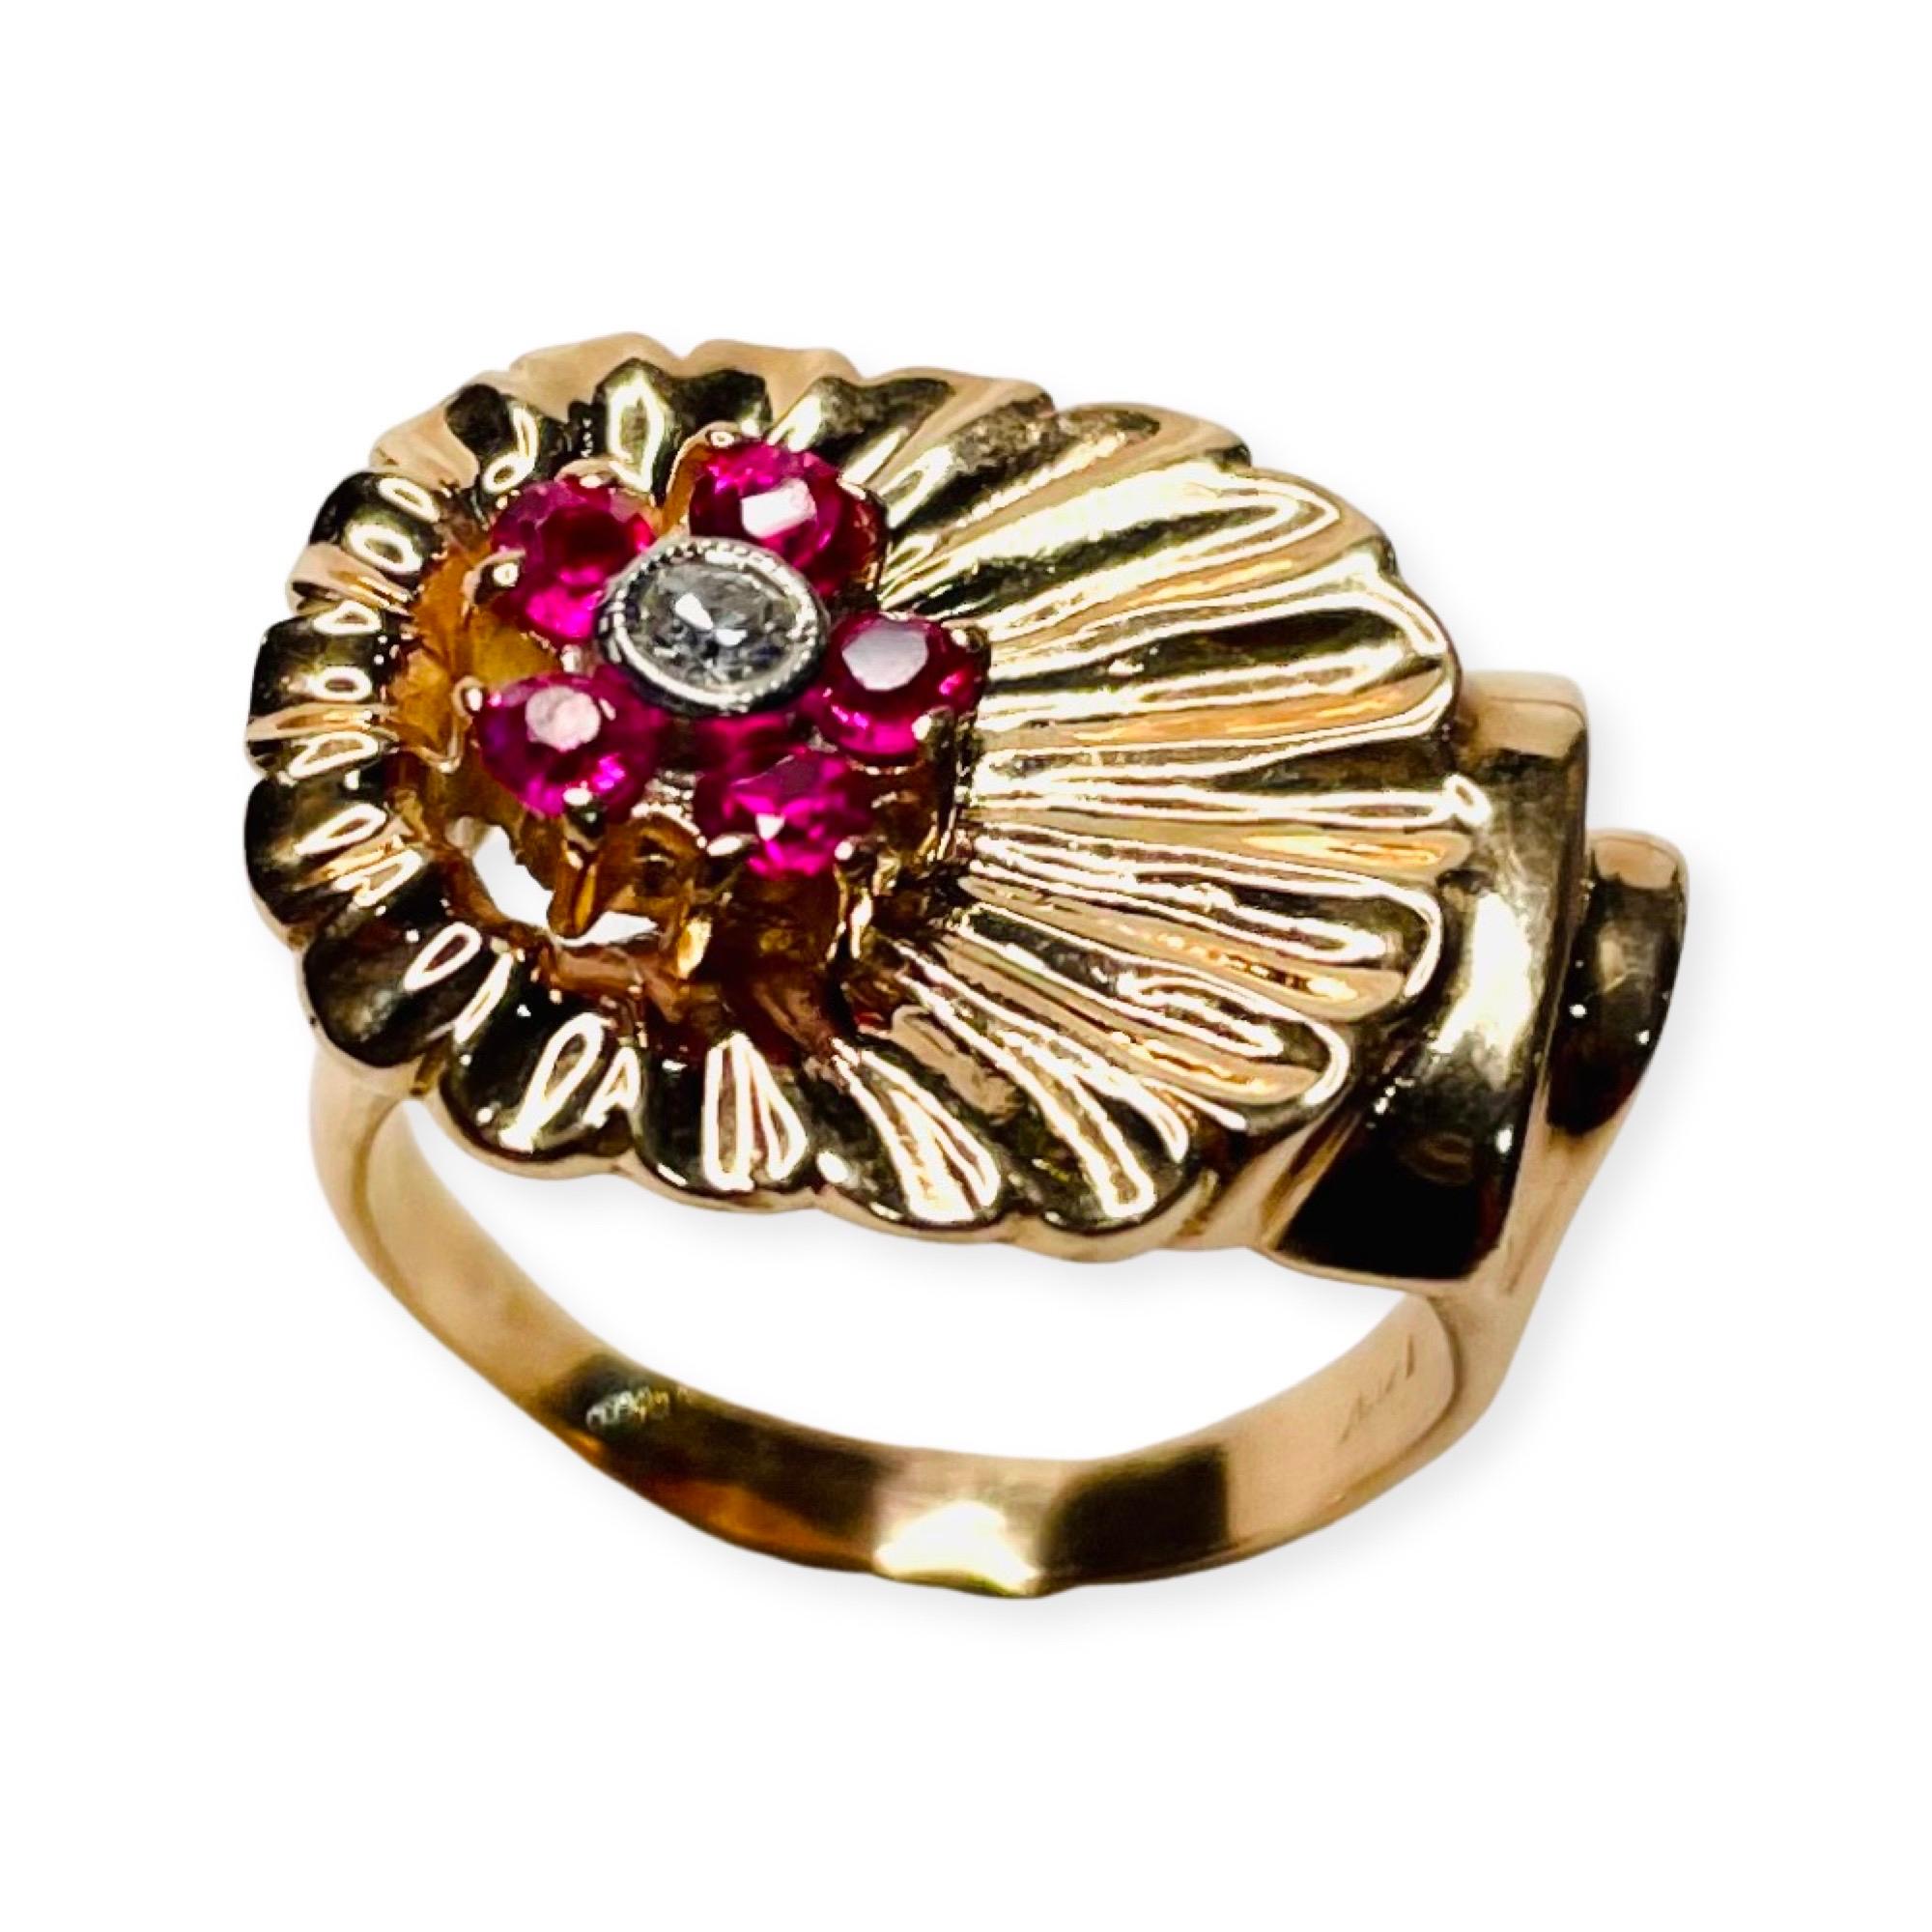 Lithos 14K Rose Gold Single Cut Diamonds and Synthetic Ruby Period RIng. There is one, 0.10 carat diamond of SI Clarity and H Color. It is bezel set. There are 5 rubies, channel and 2 prong set, around the center diamond. It is finger size 6.5 but